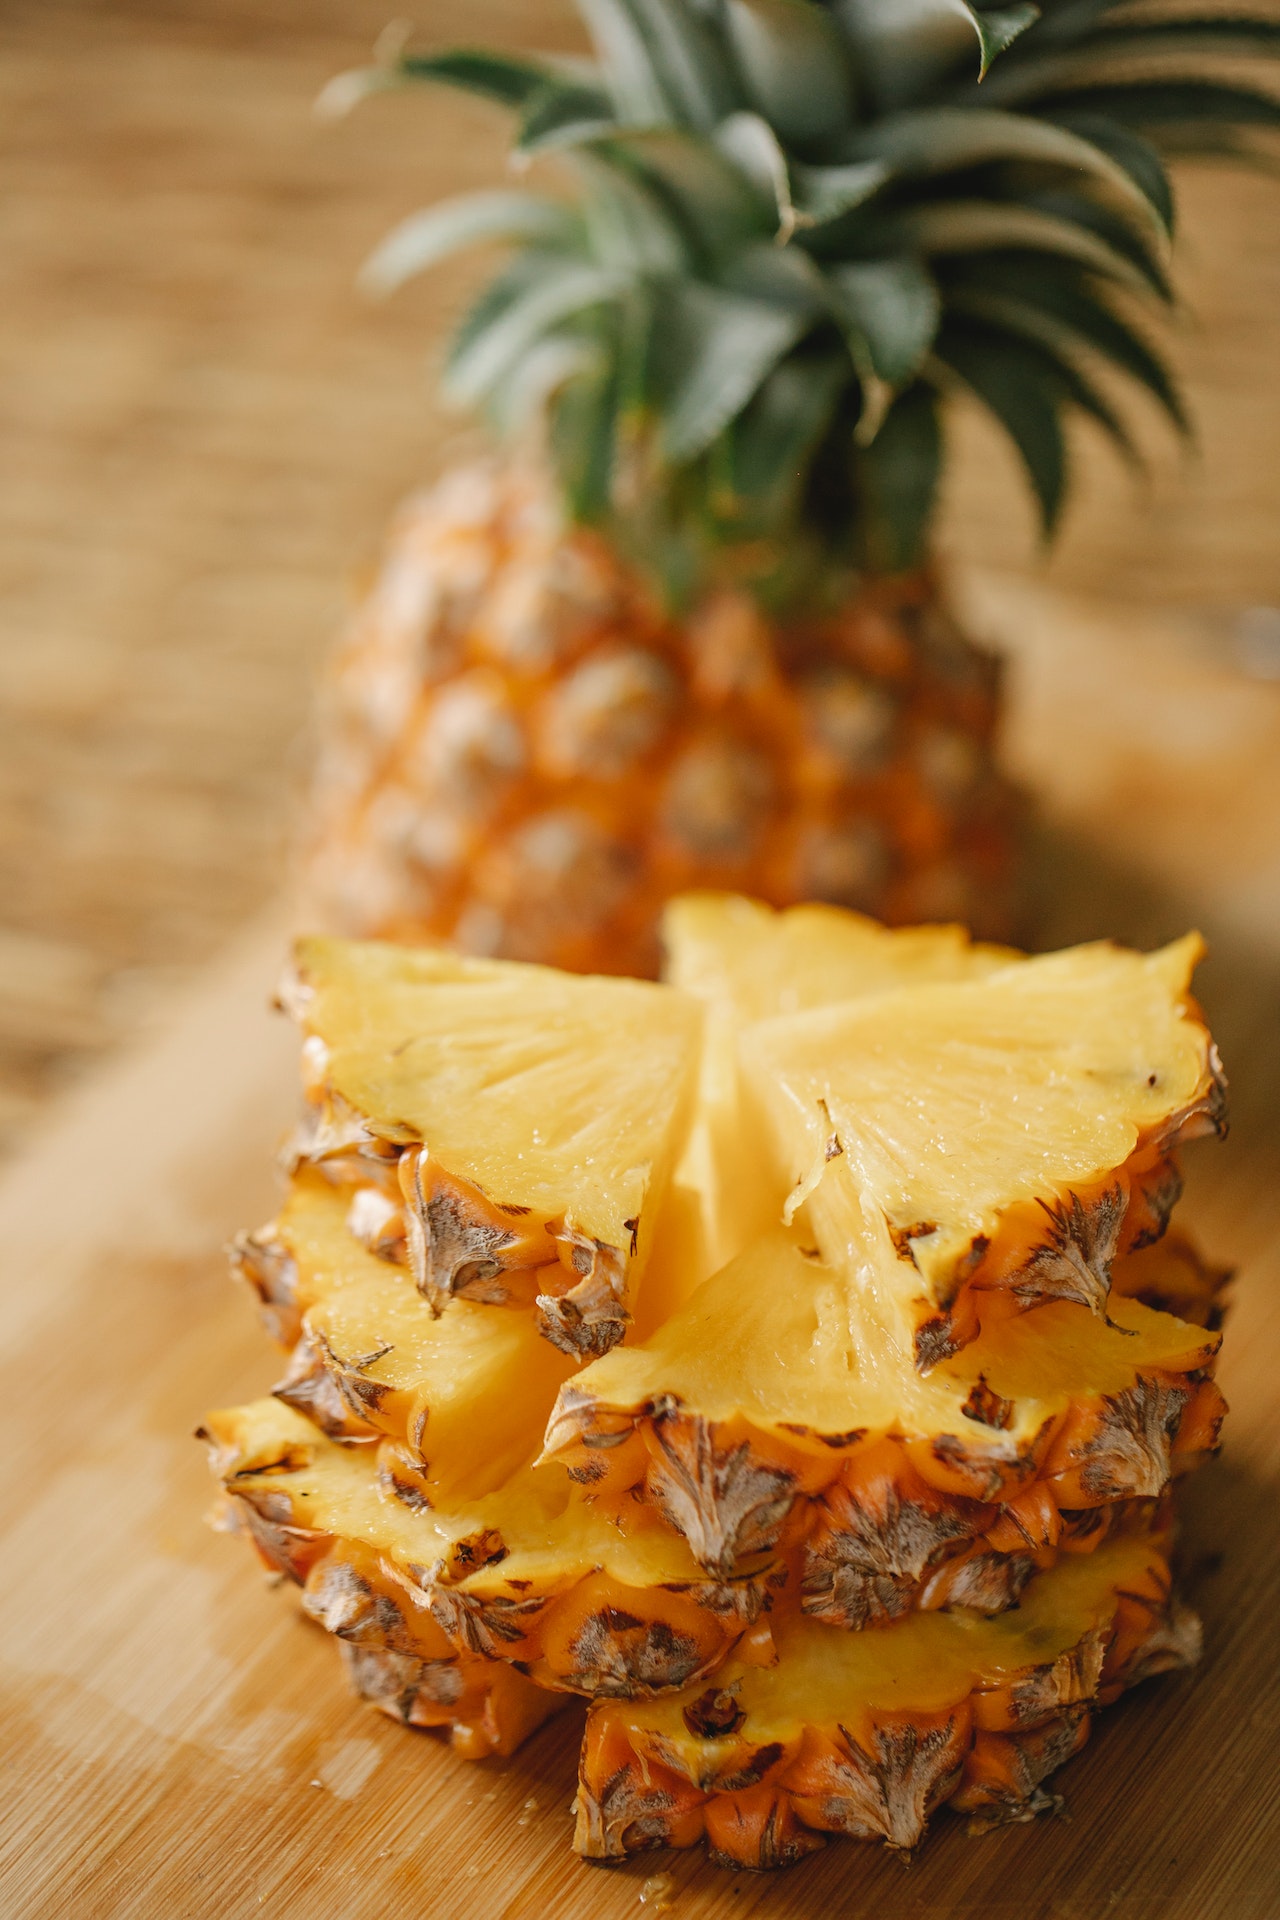 Reasons Pineapple Is Good For You 